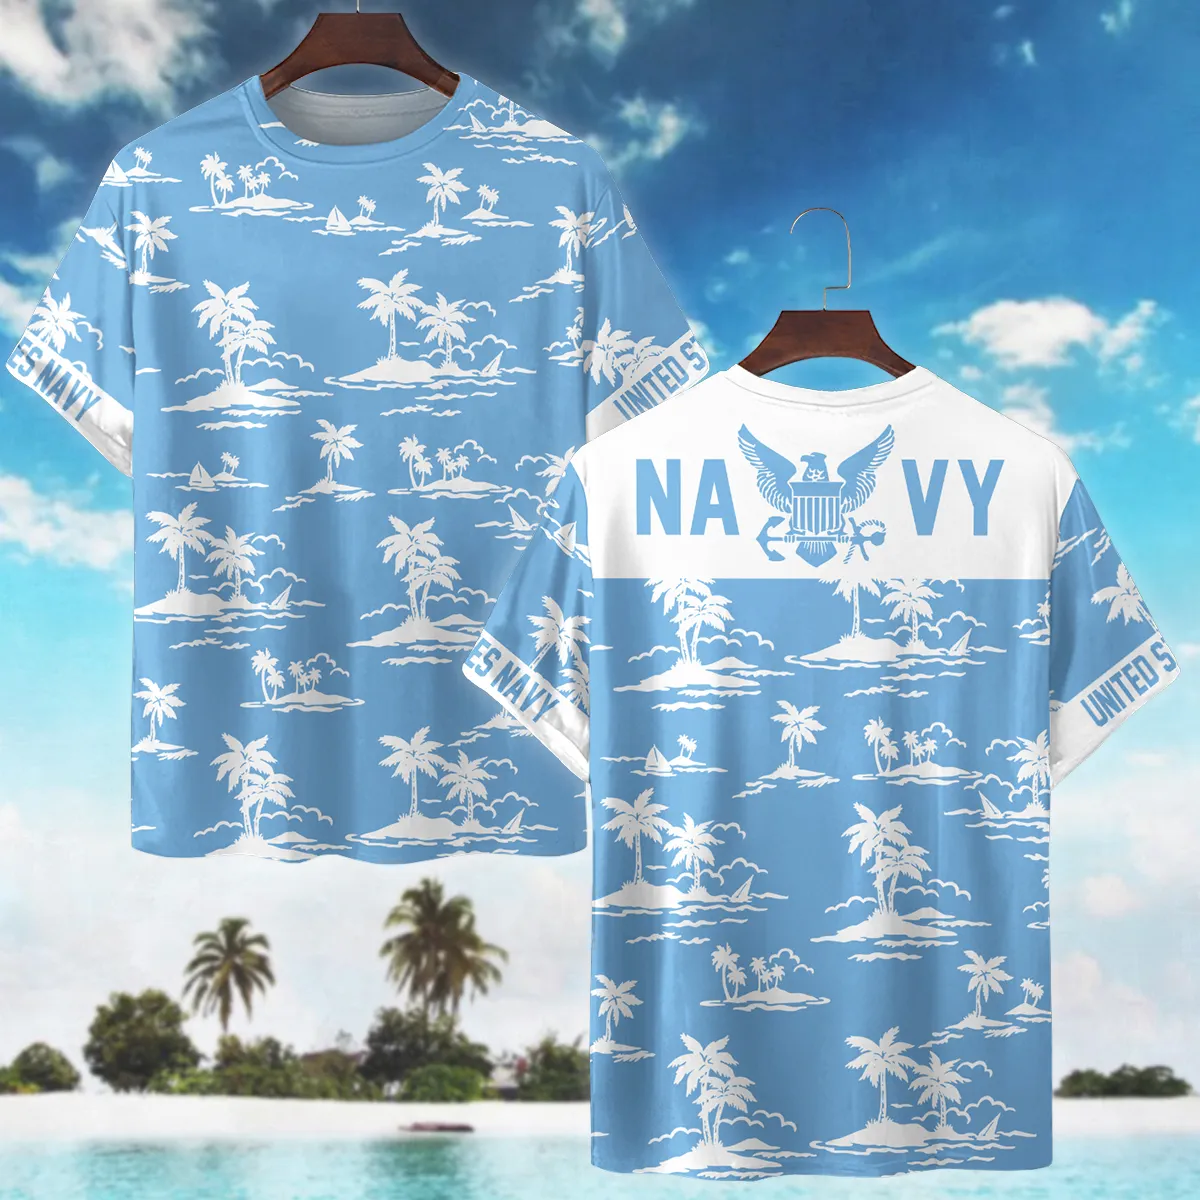 United States Armed Forces U.S. Navy Oversized Hawaiian Shirt All Over Prints Gift Loves HBLVTR290524A04NV1HW